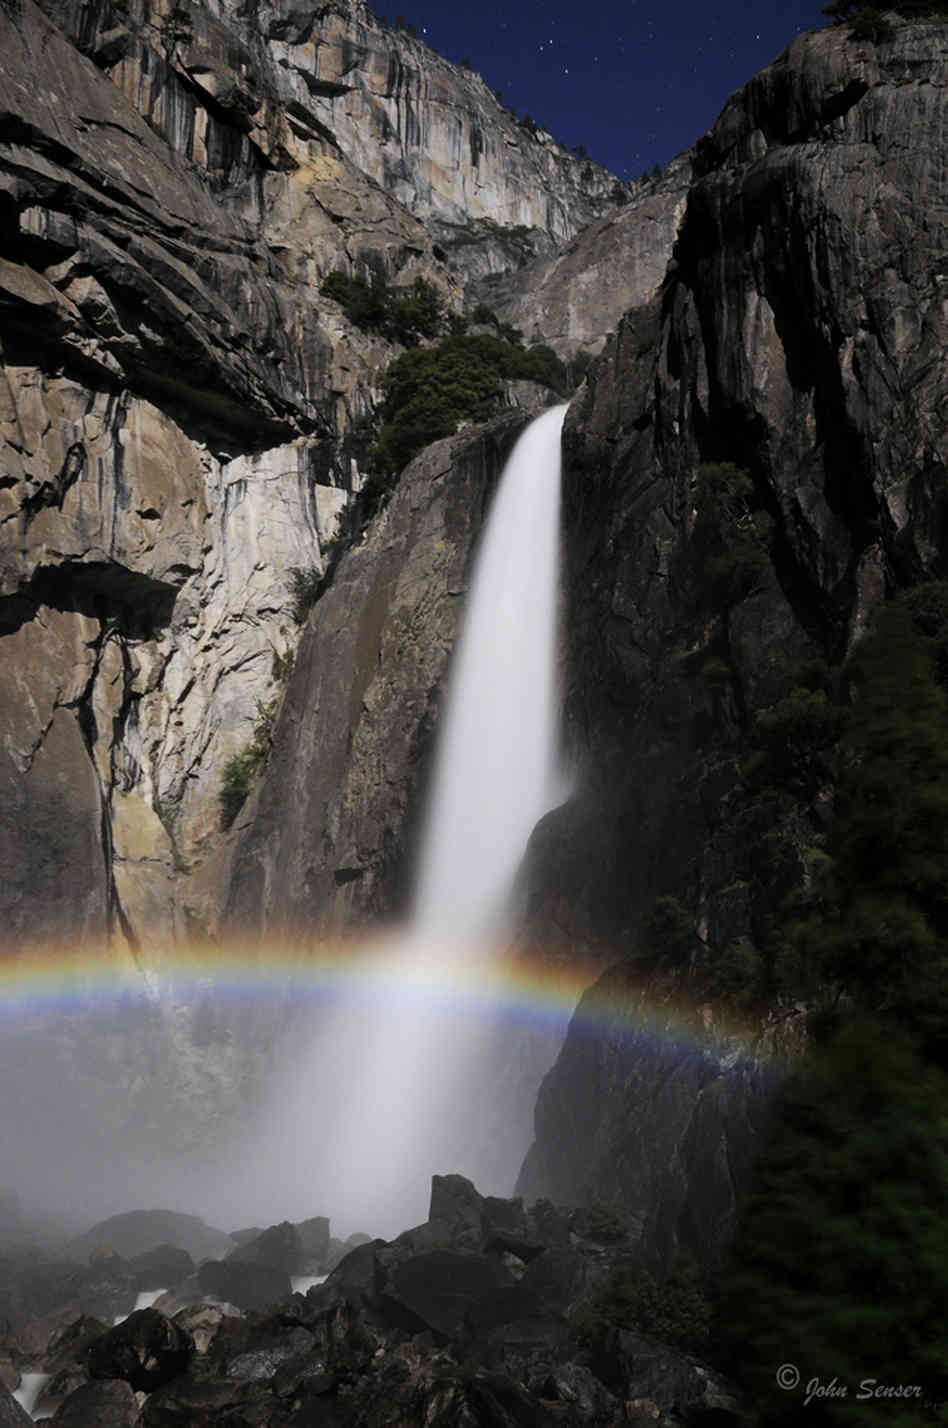 As Yosemite Park Turns 150, Charms And Challenges Endure